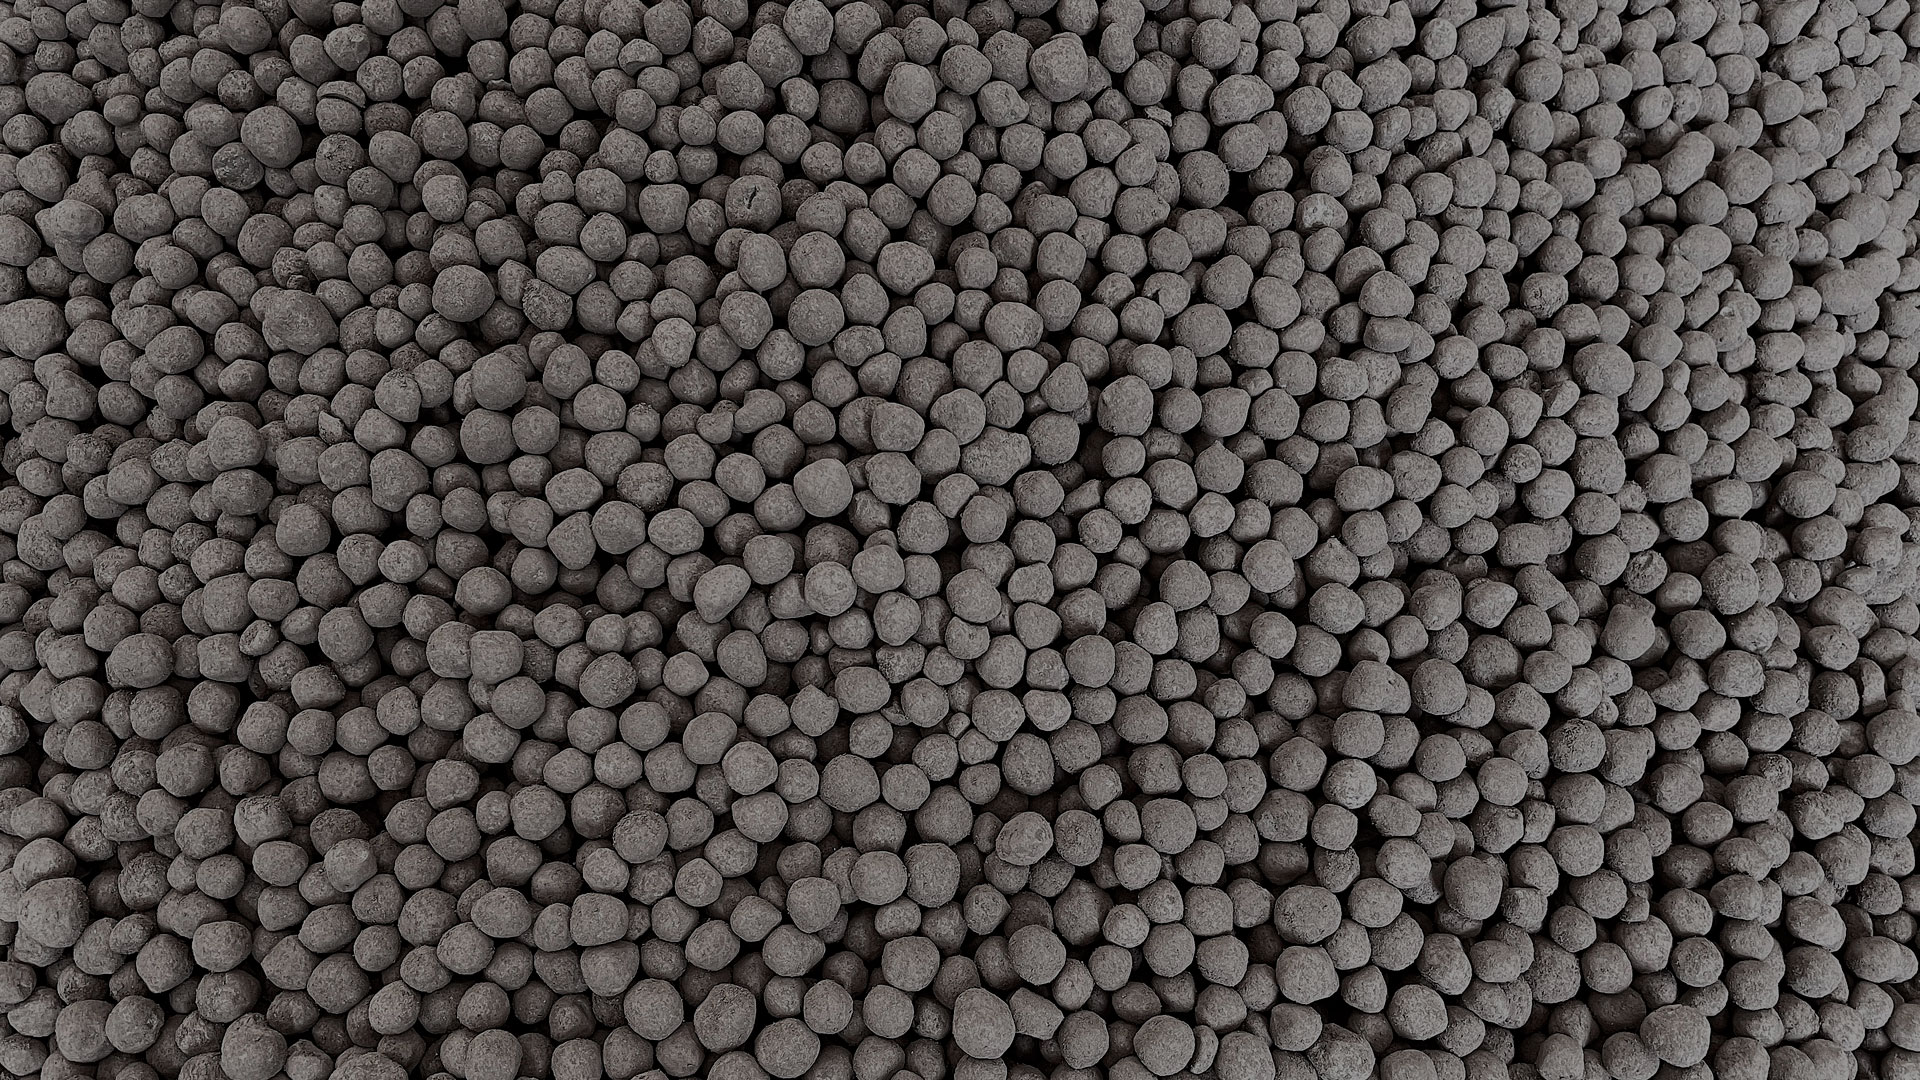 The fossil free steel from SSAB is made from sustainable sponge iron